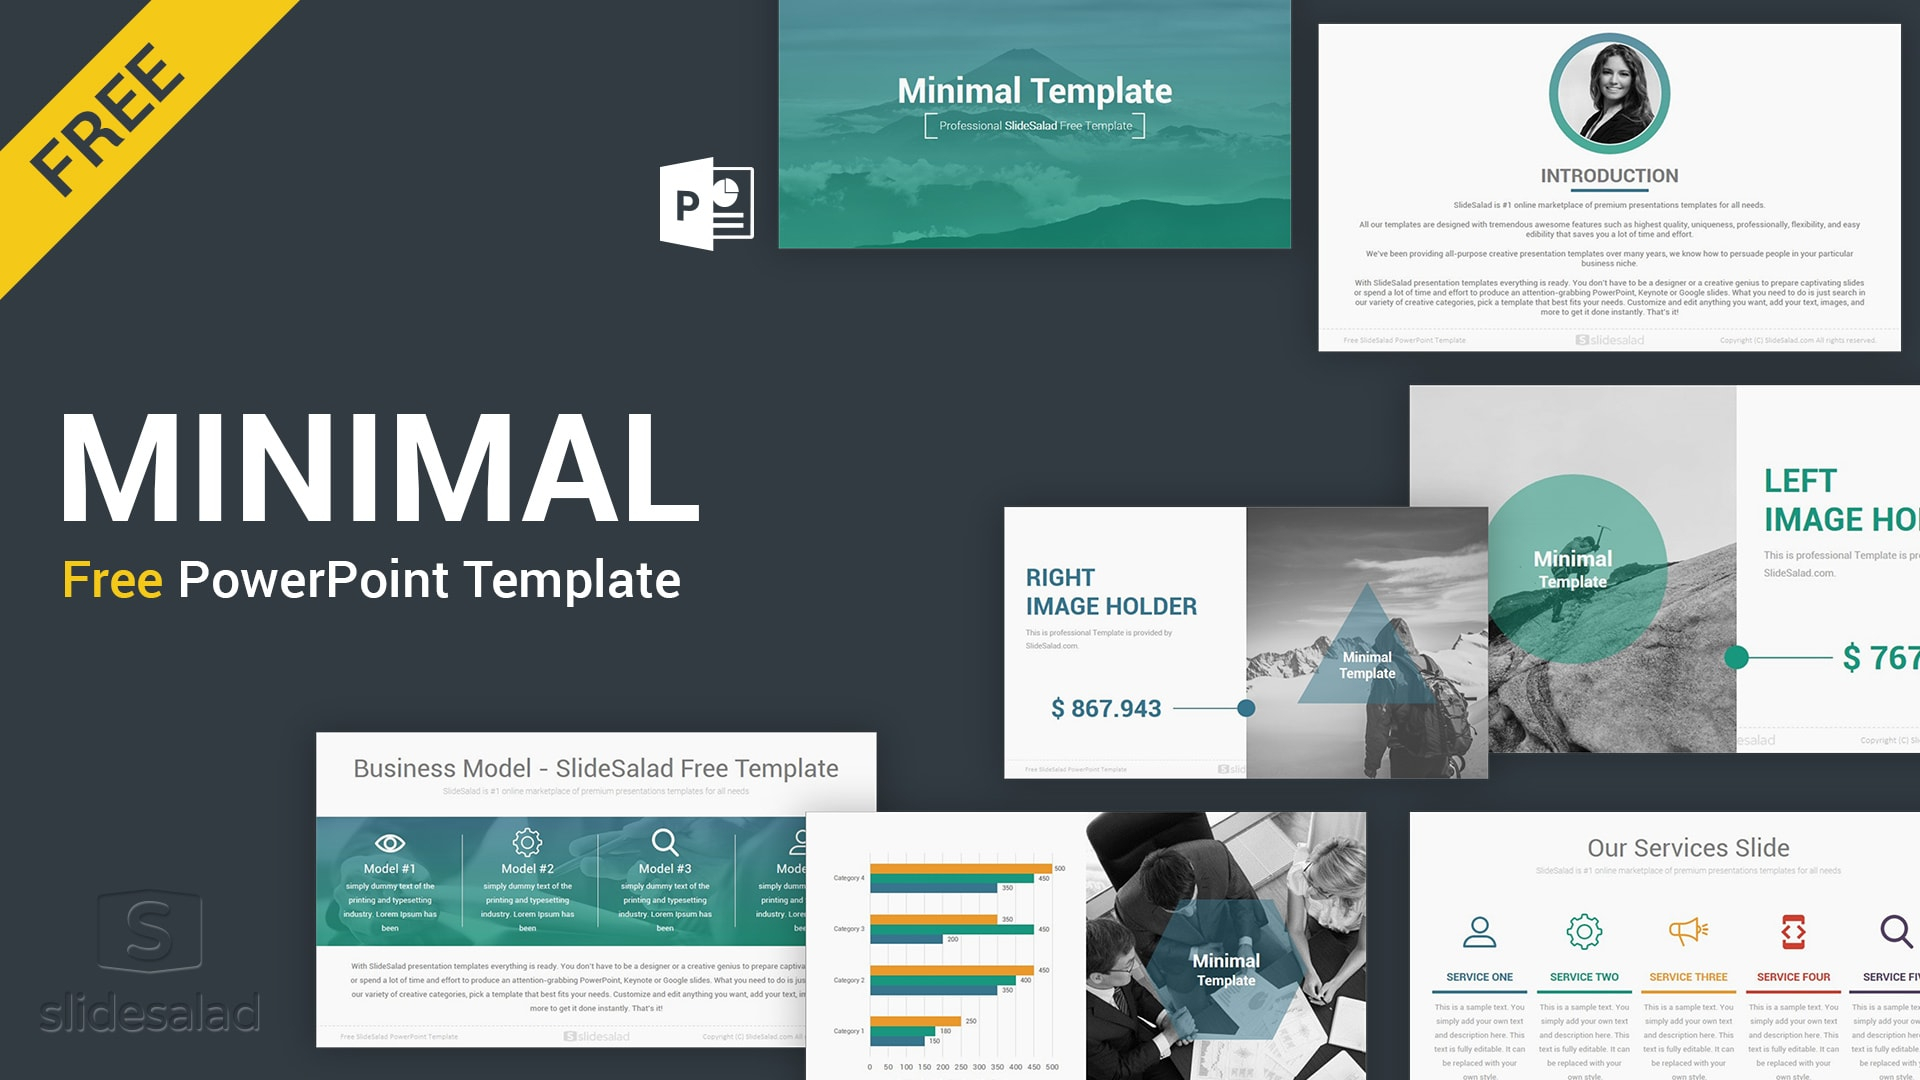 Best Free Presentation Templates Professional Designs 2019 Pertaining To Powerpoint Slides Design Templates For Free